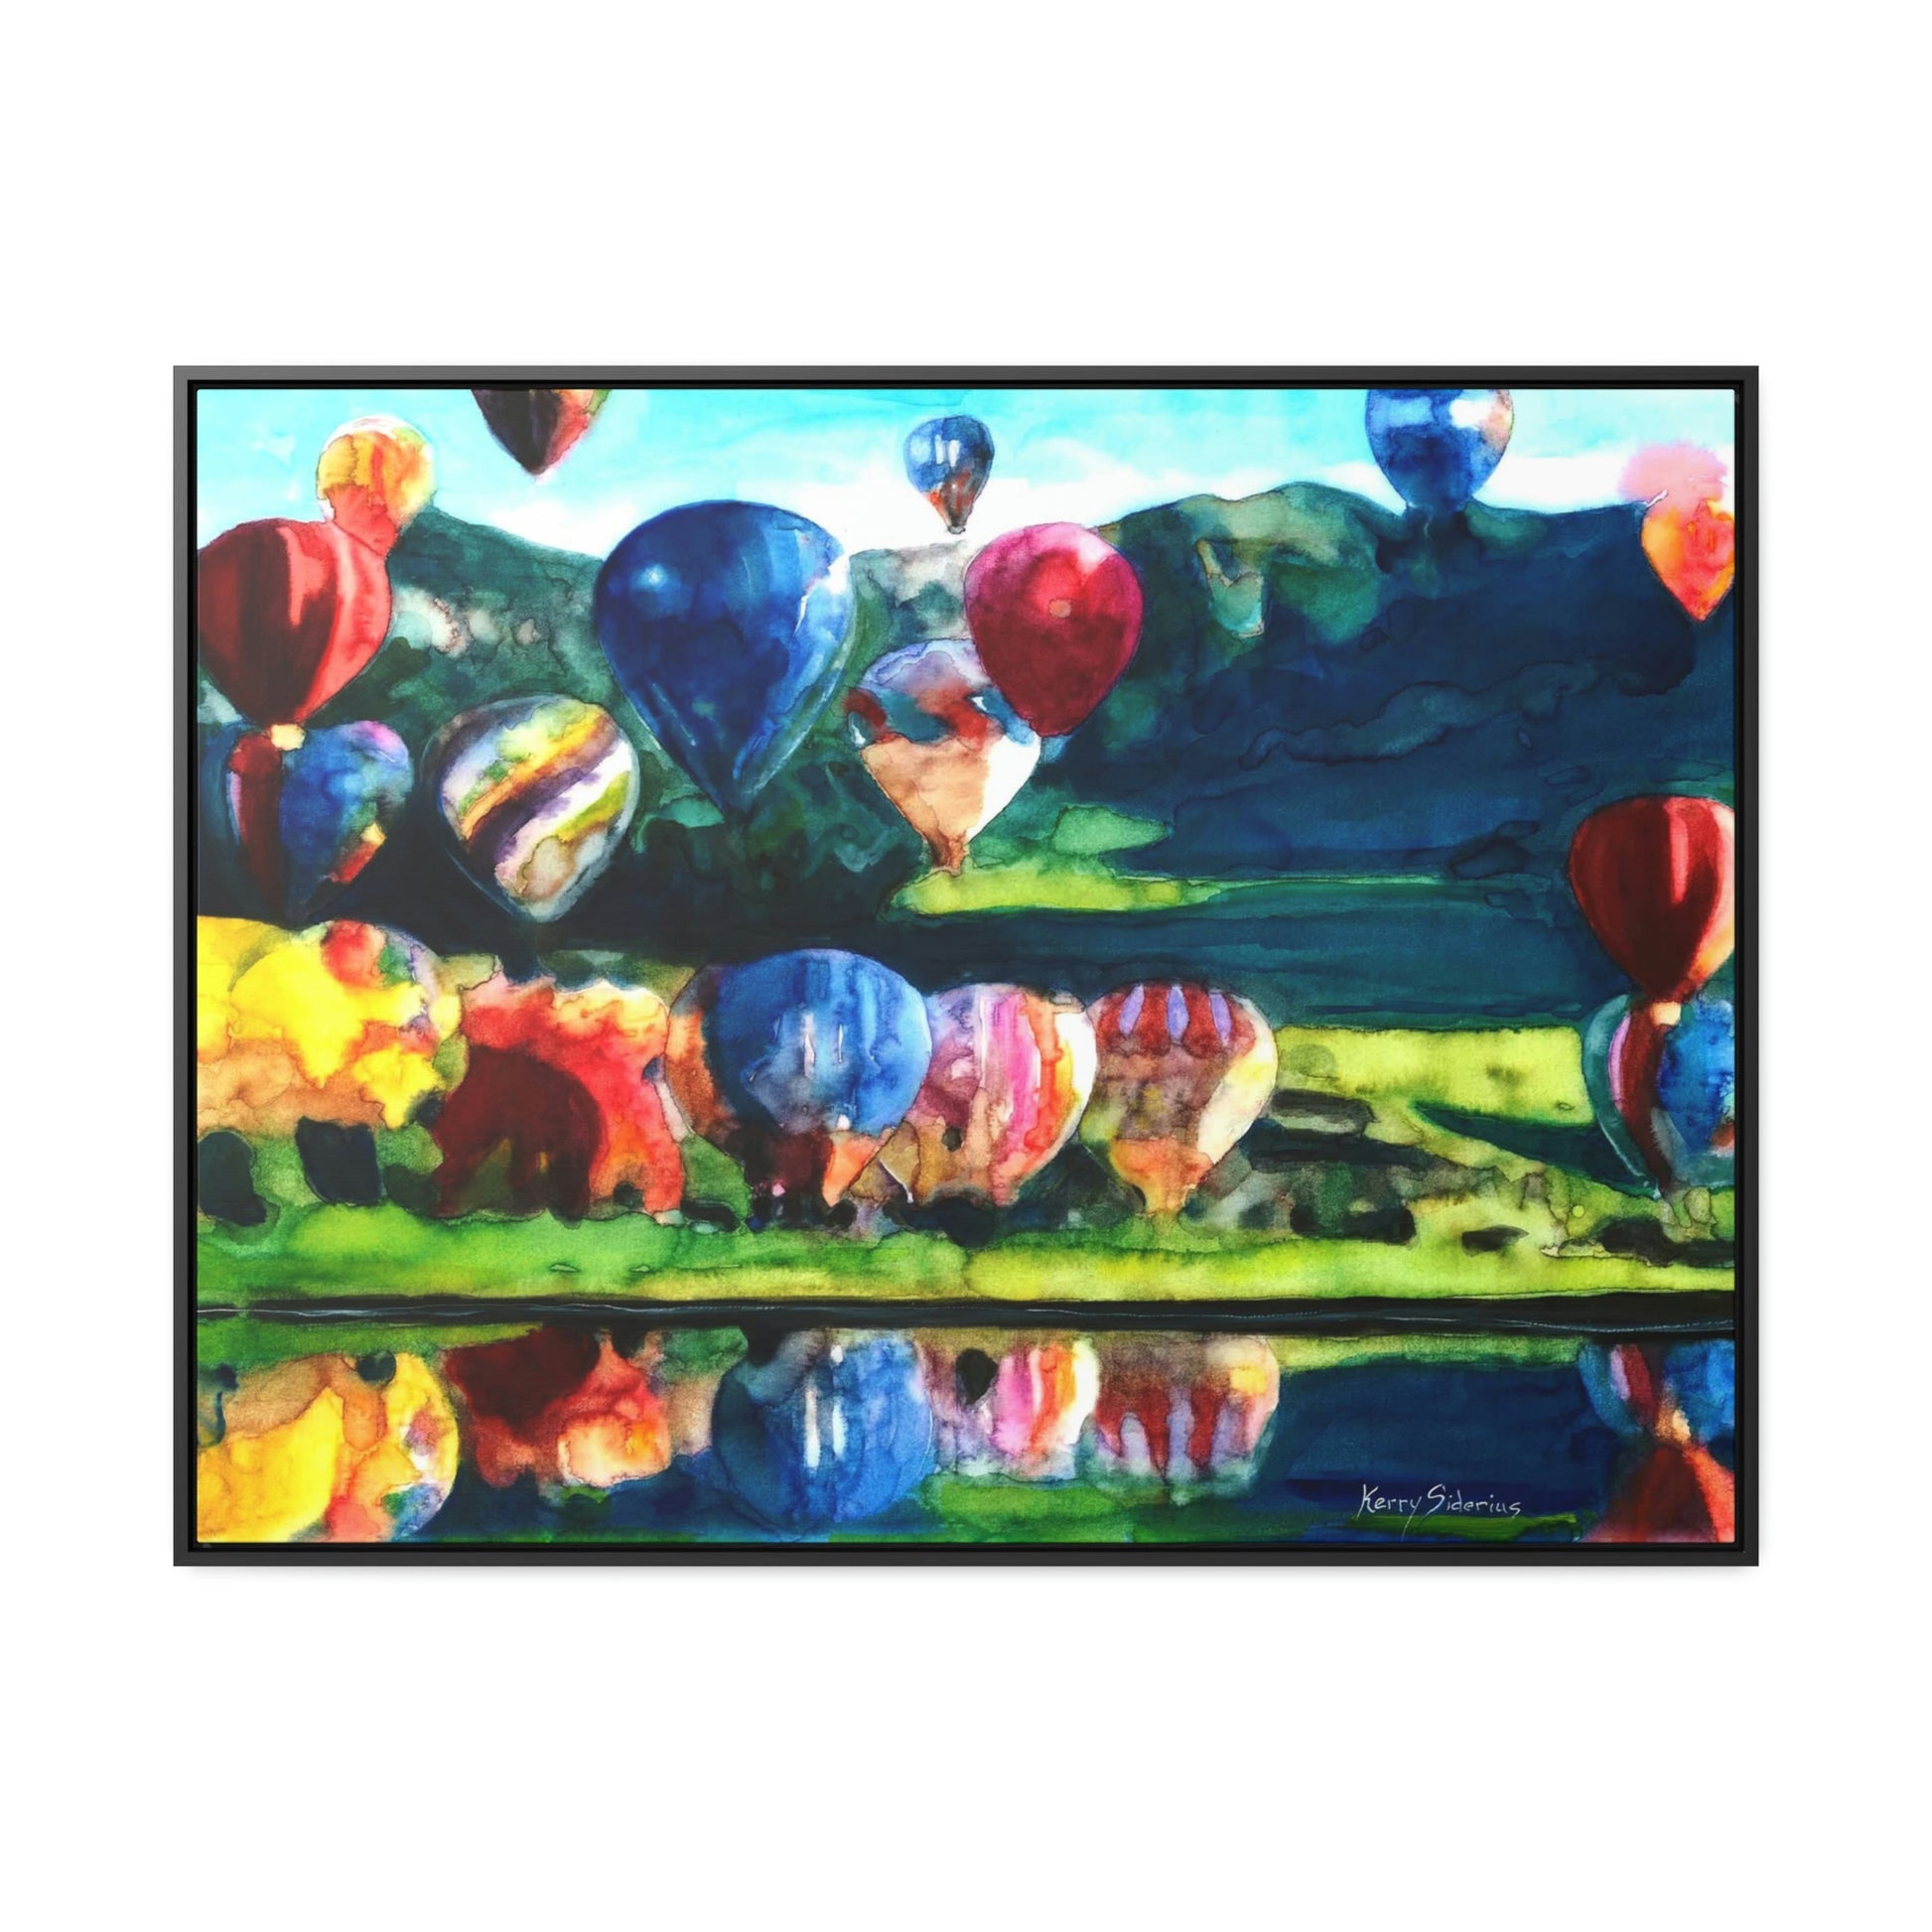 "Hot Air Balloon Reflection in Quincy" Framed Canvas - Kerry Siderius Art 